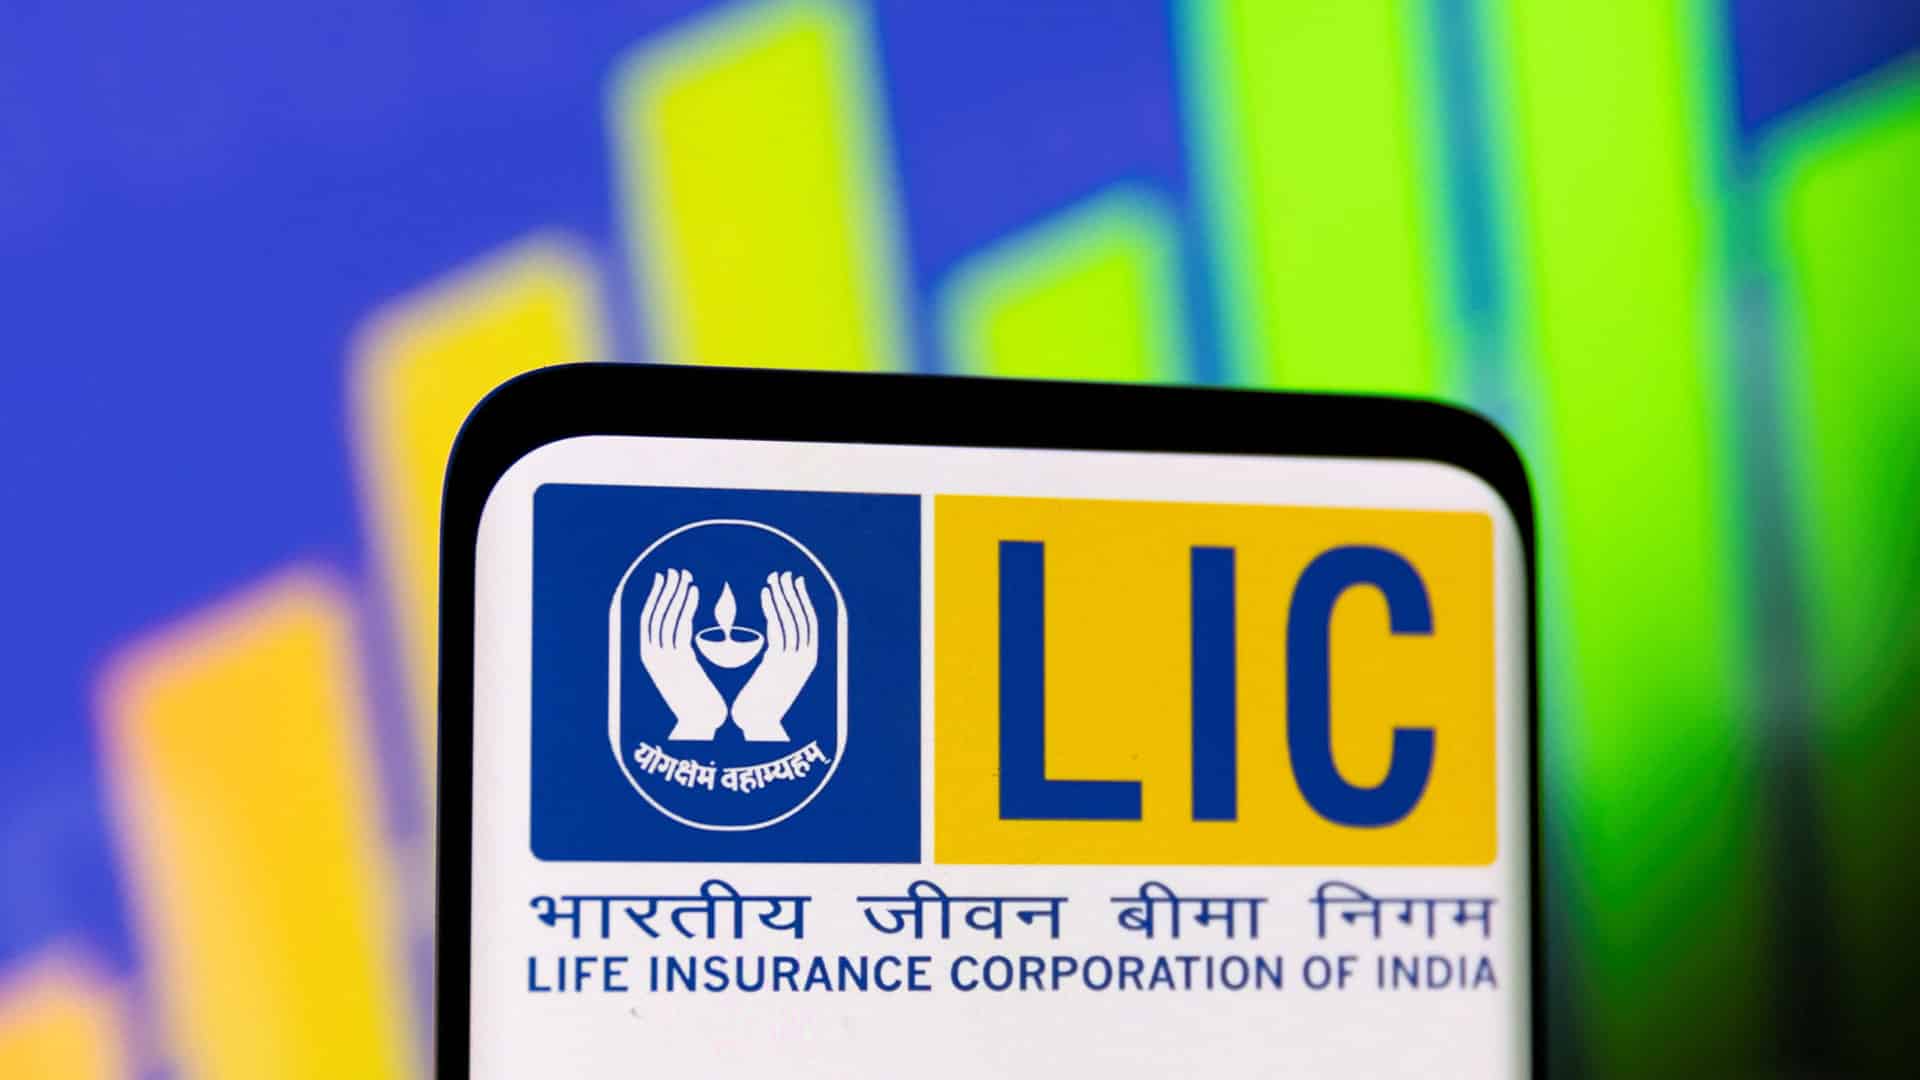 Govt may defer LIC IPO to next fiscal amid Ukraine crisis: Experts